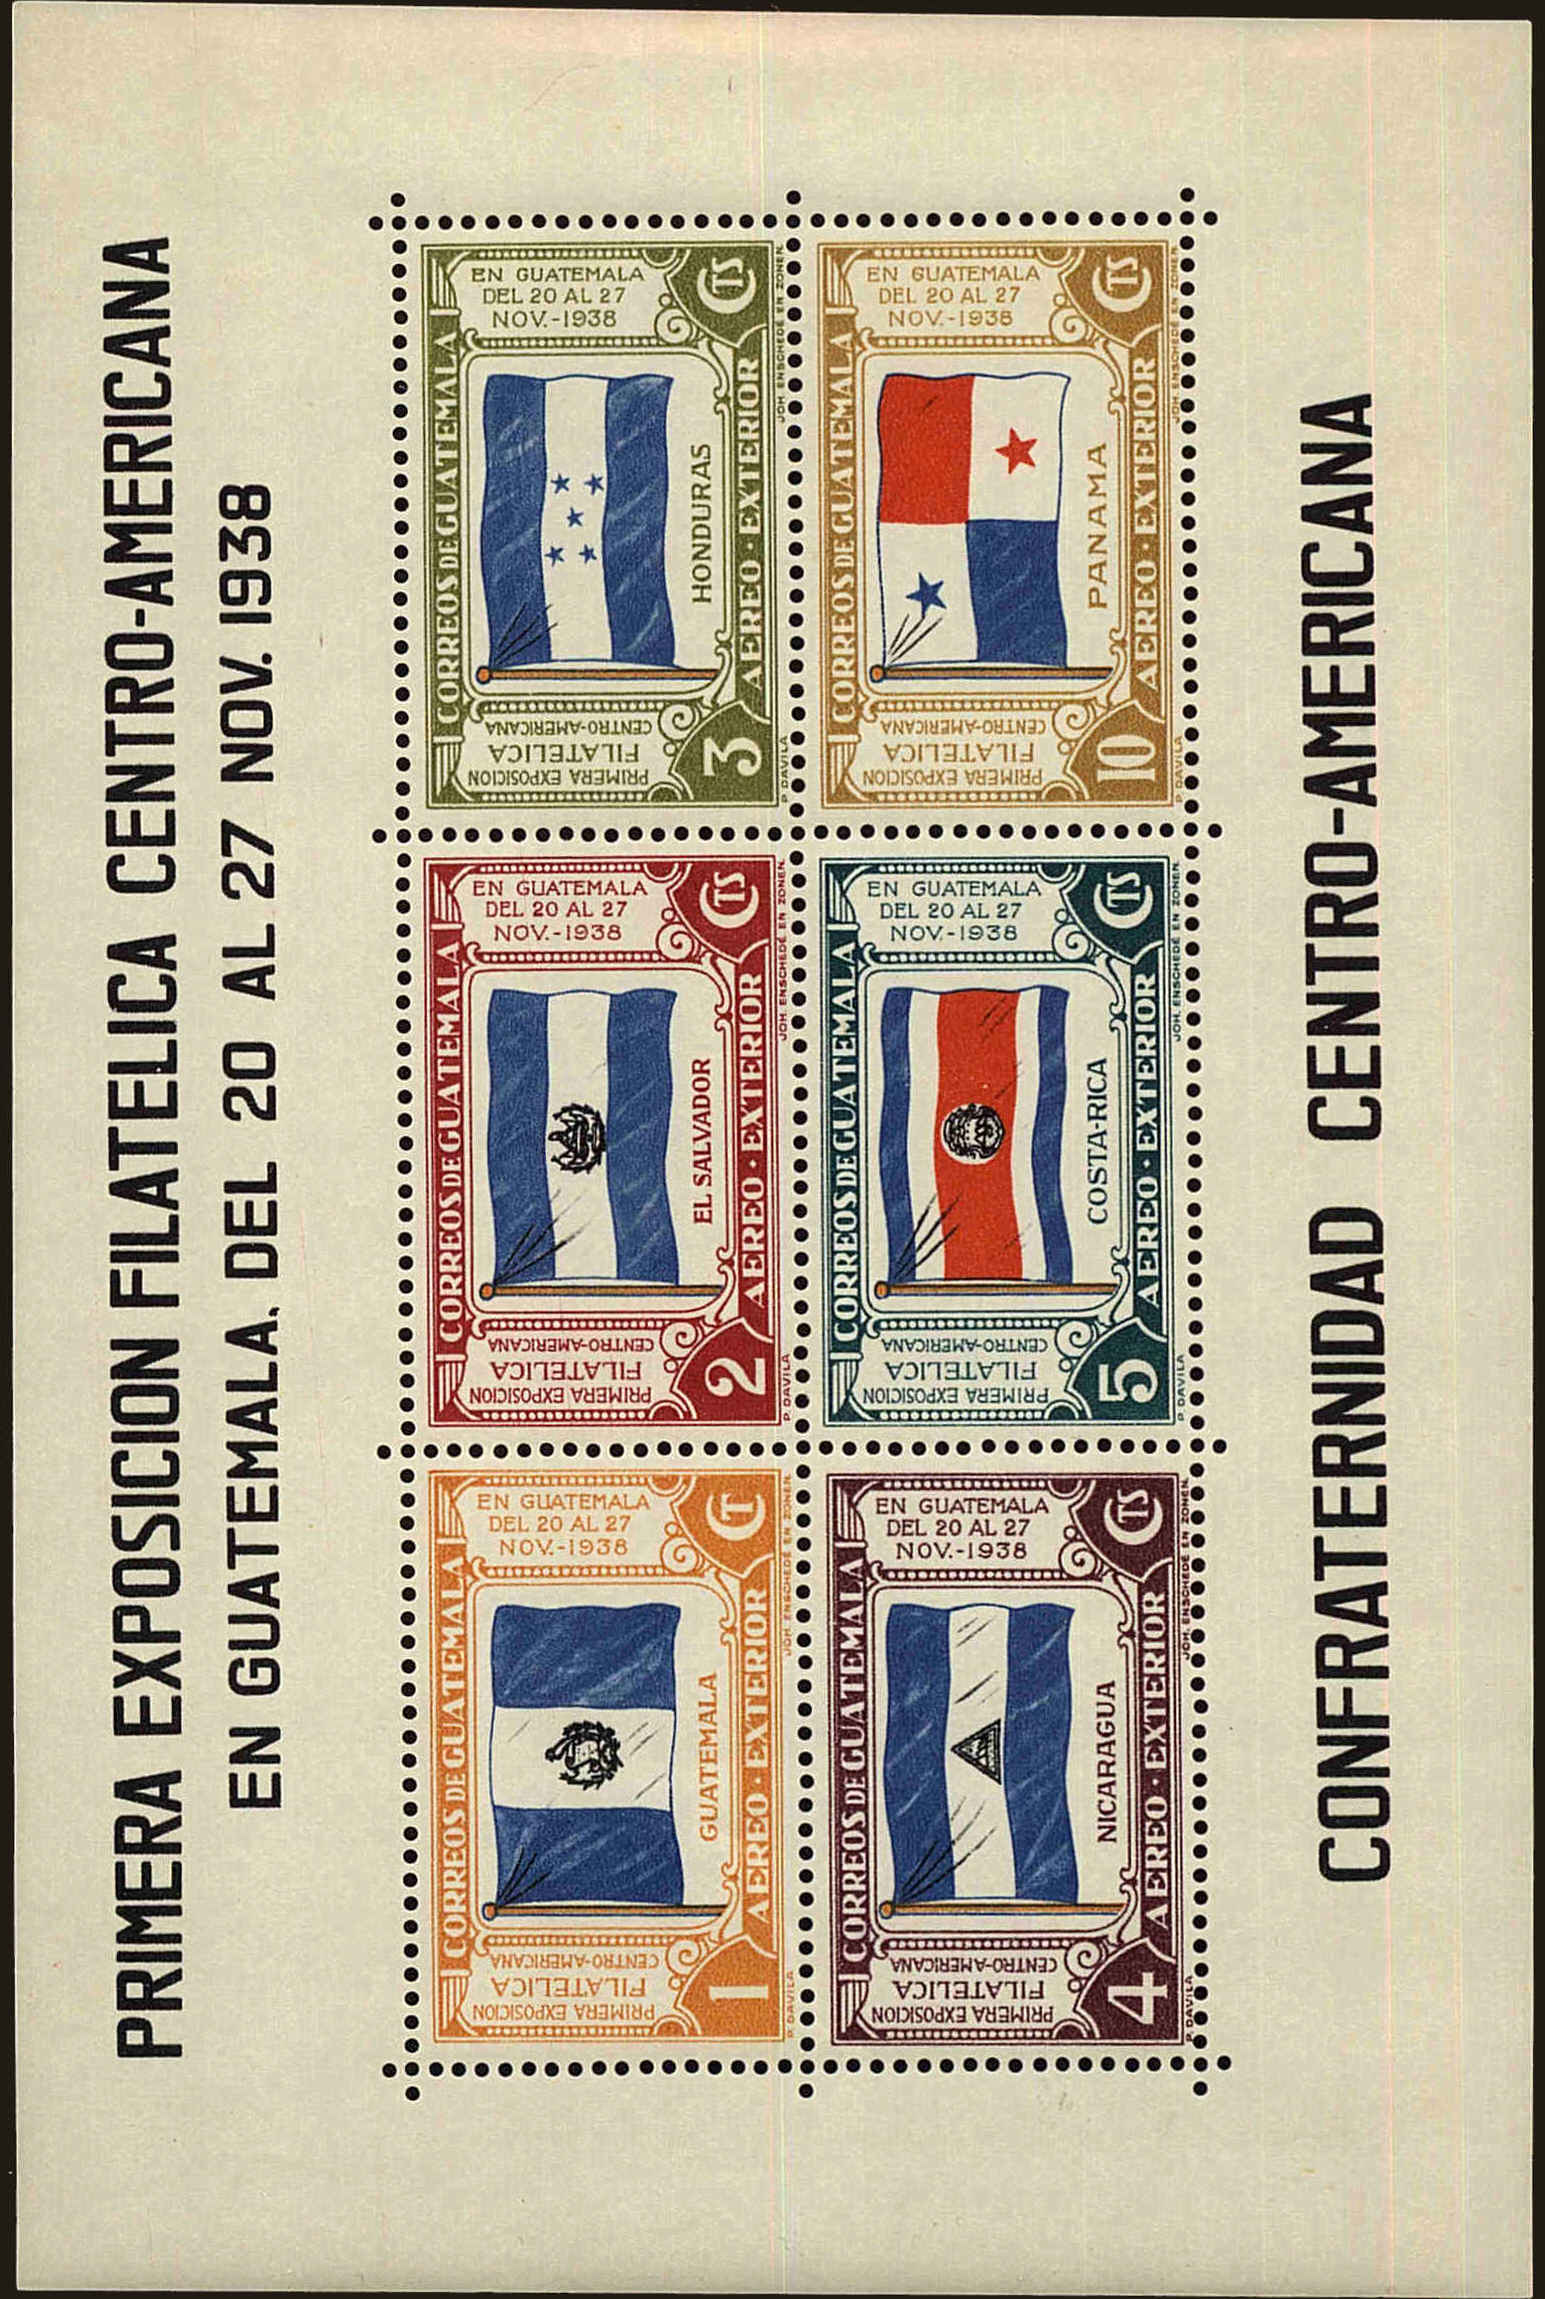 Front view of Haiti C65 collectors stamp